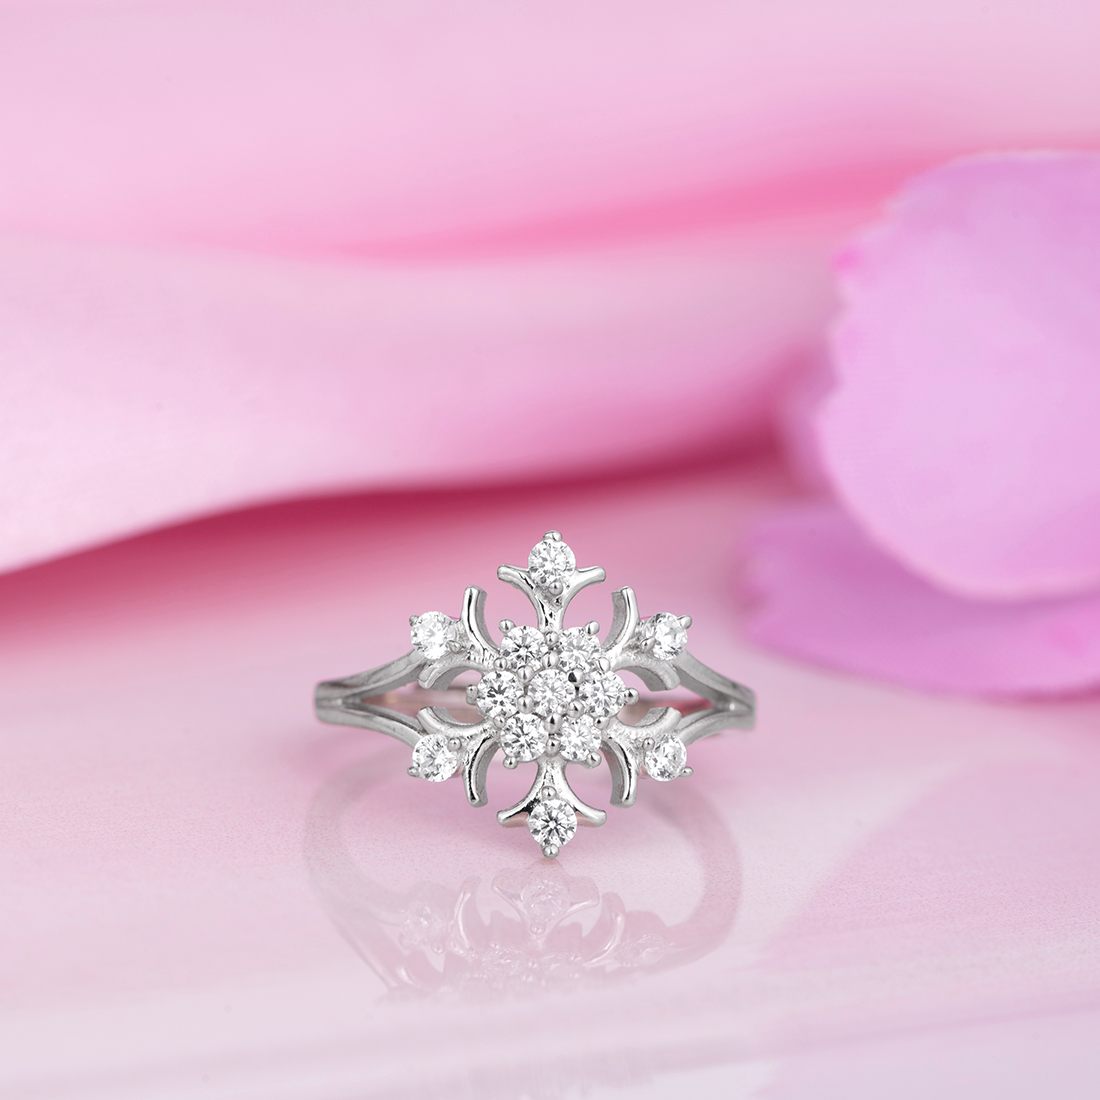 Floral Radiance Rhodium Plated 925 Sterling Silver Women's Ring